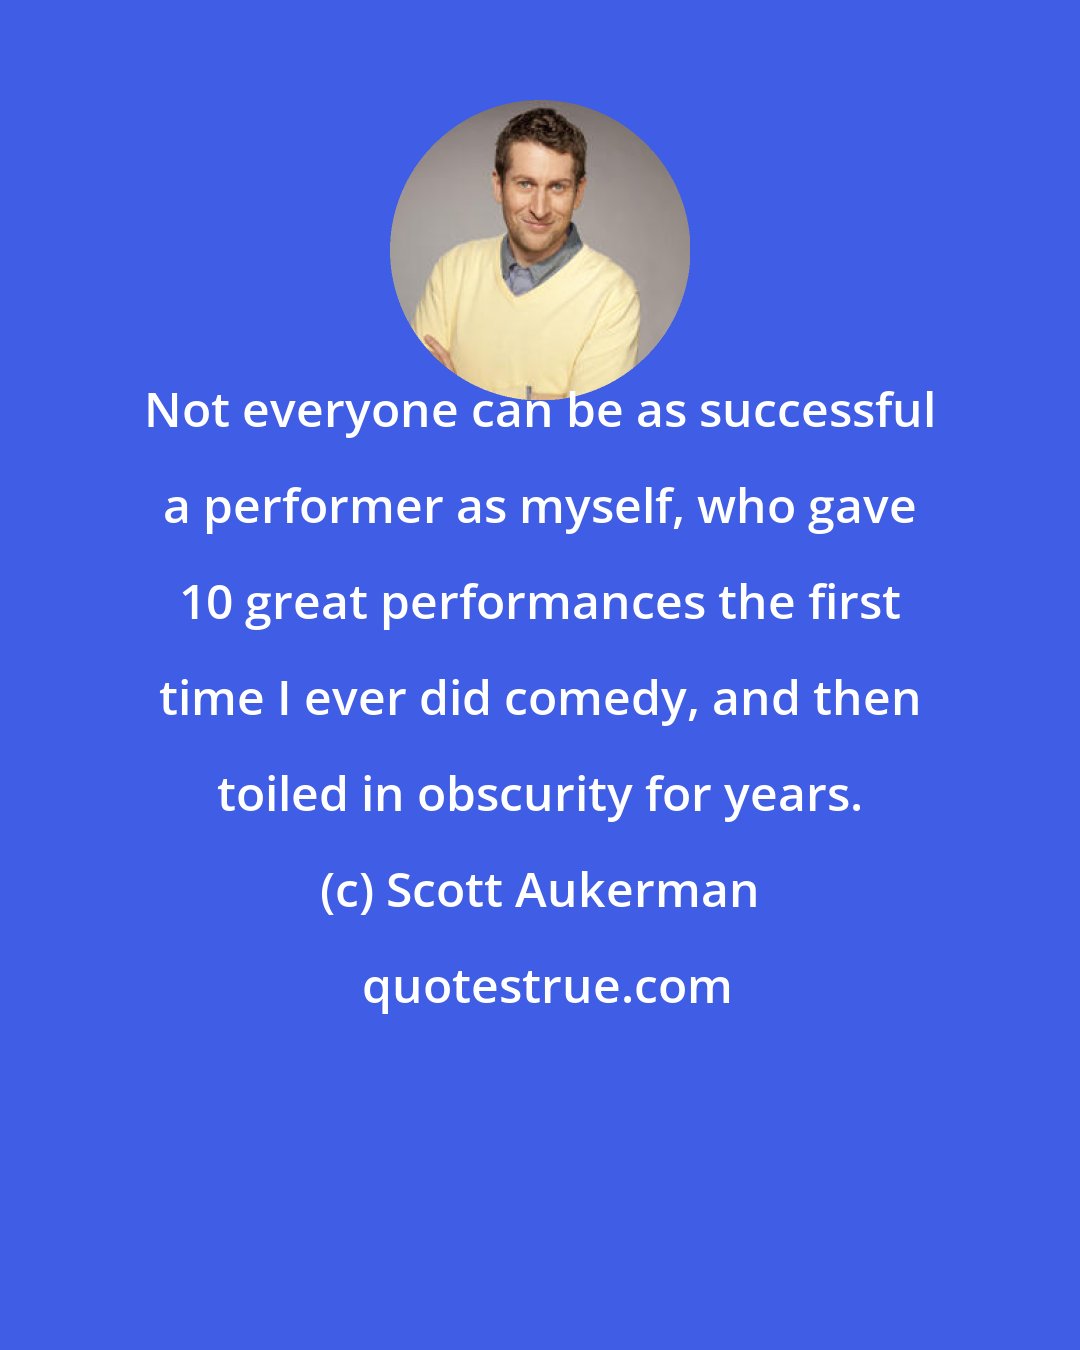 Scott Aukerman: Not everyone can be as successful a performer as myself, who gave 10 great performances the first time I ever did comedy, and then toiled in obscurity for years.